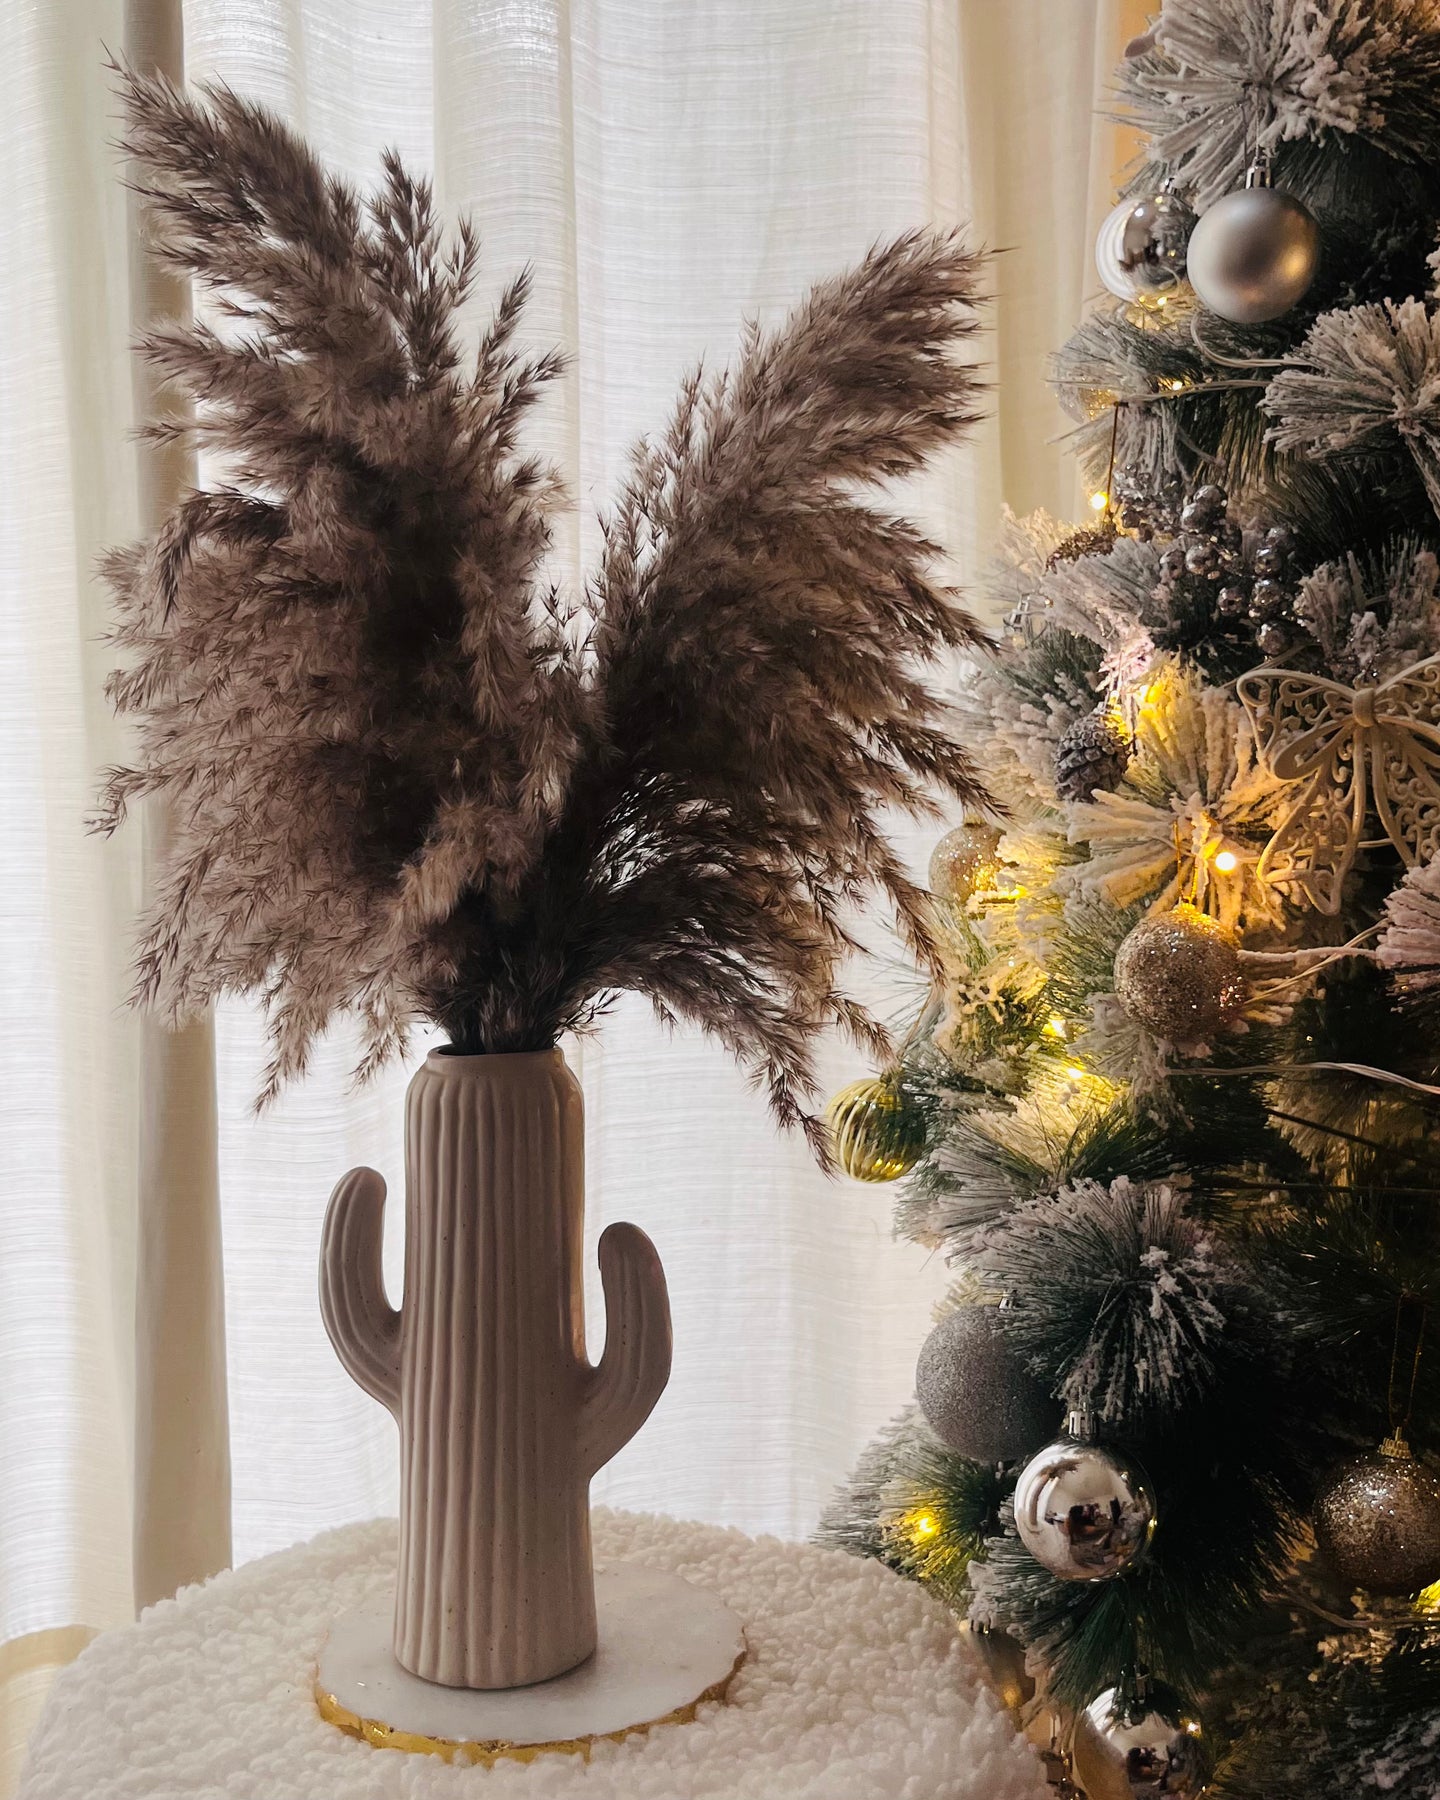 Cactus vase with fluffy pampas set